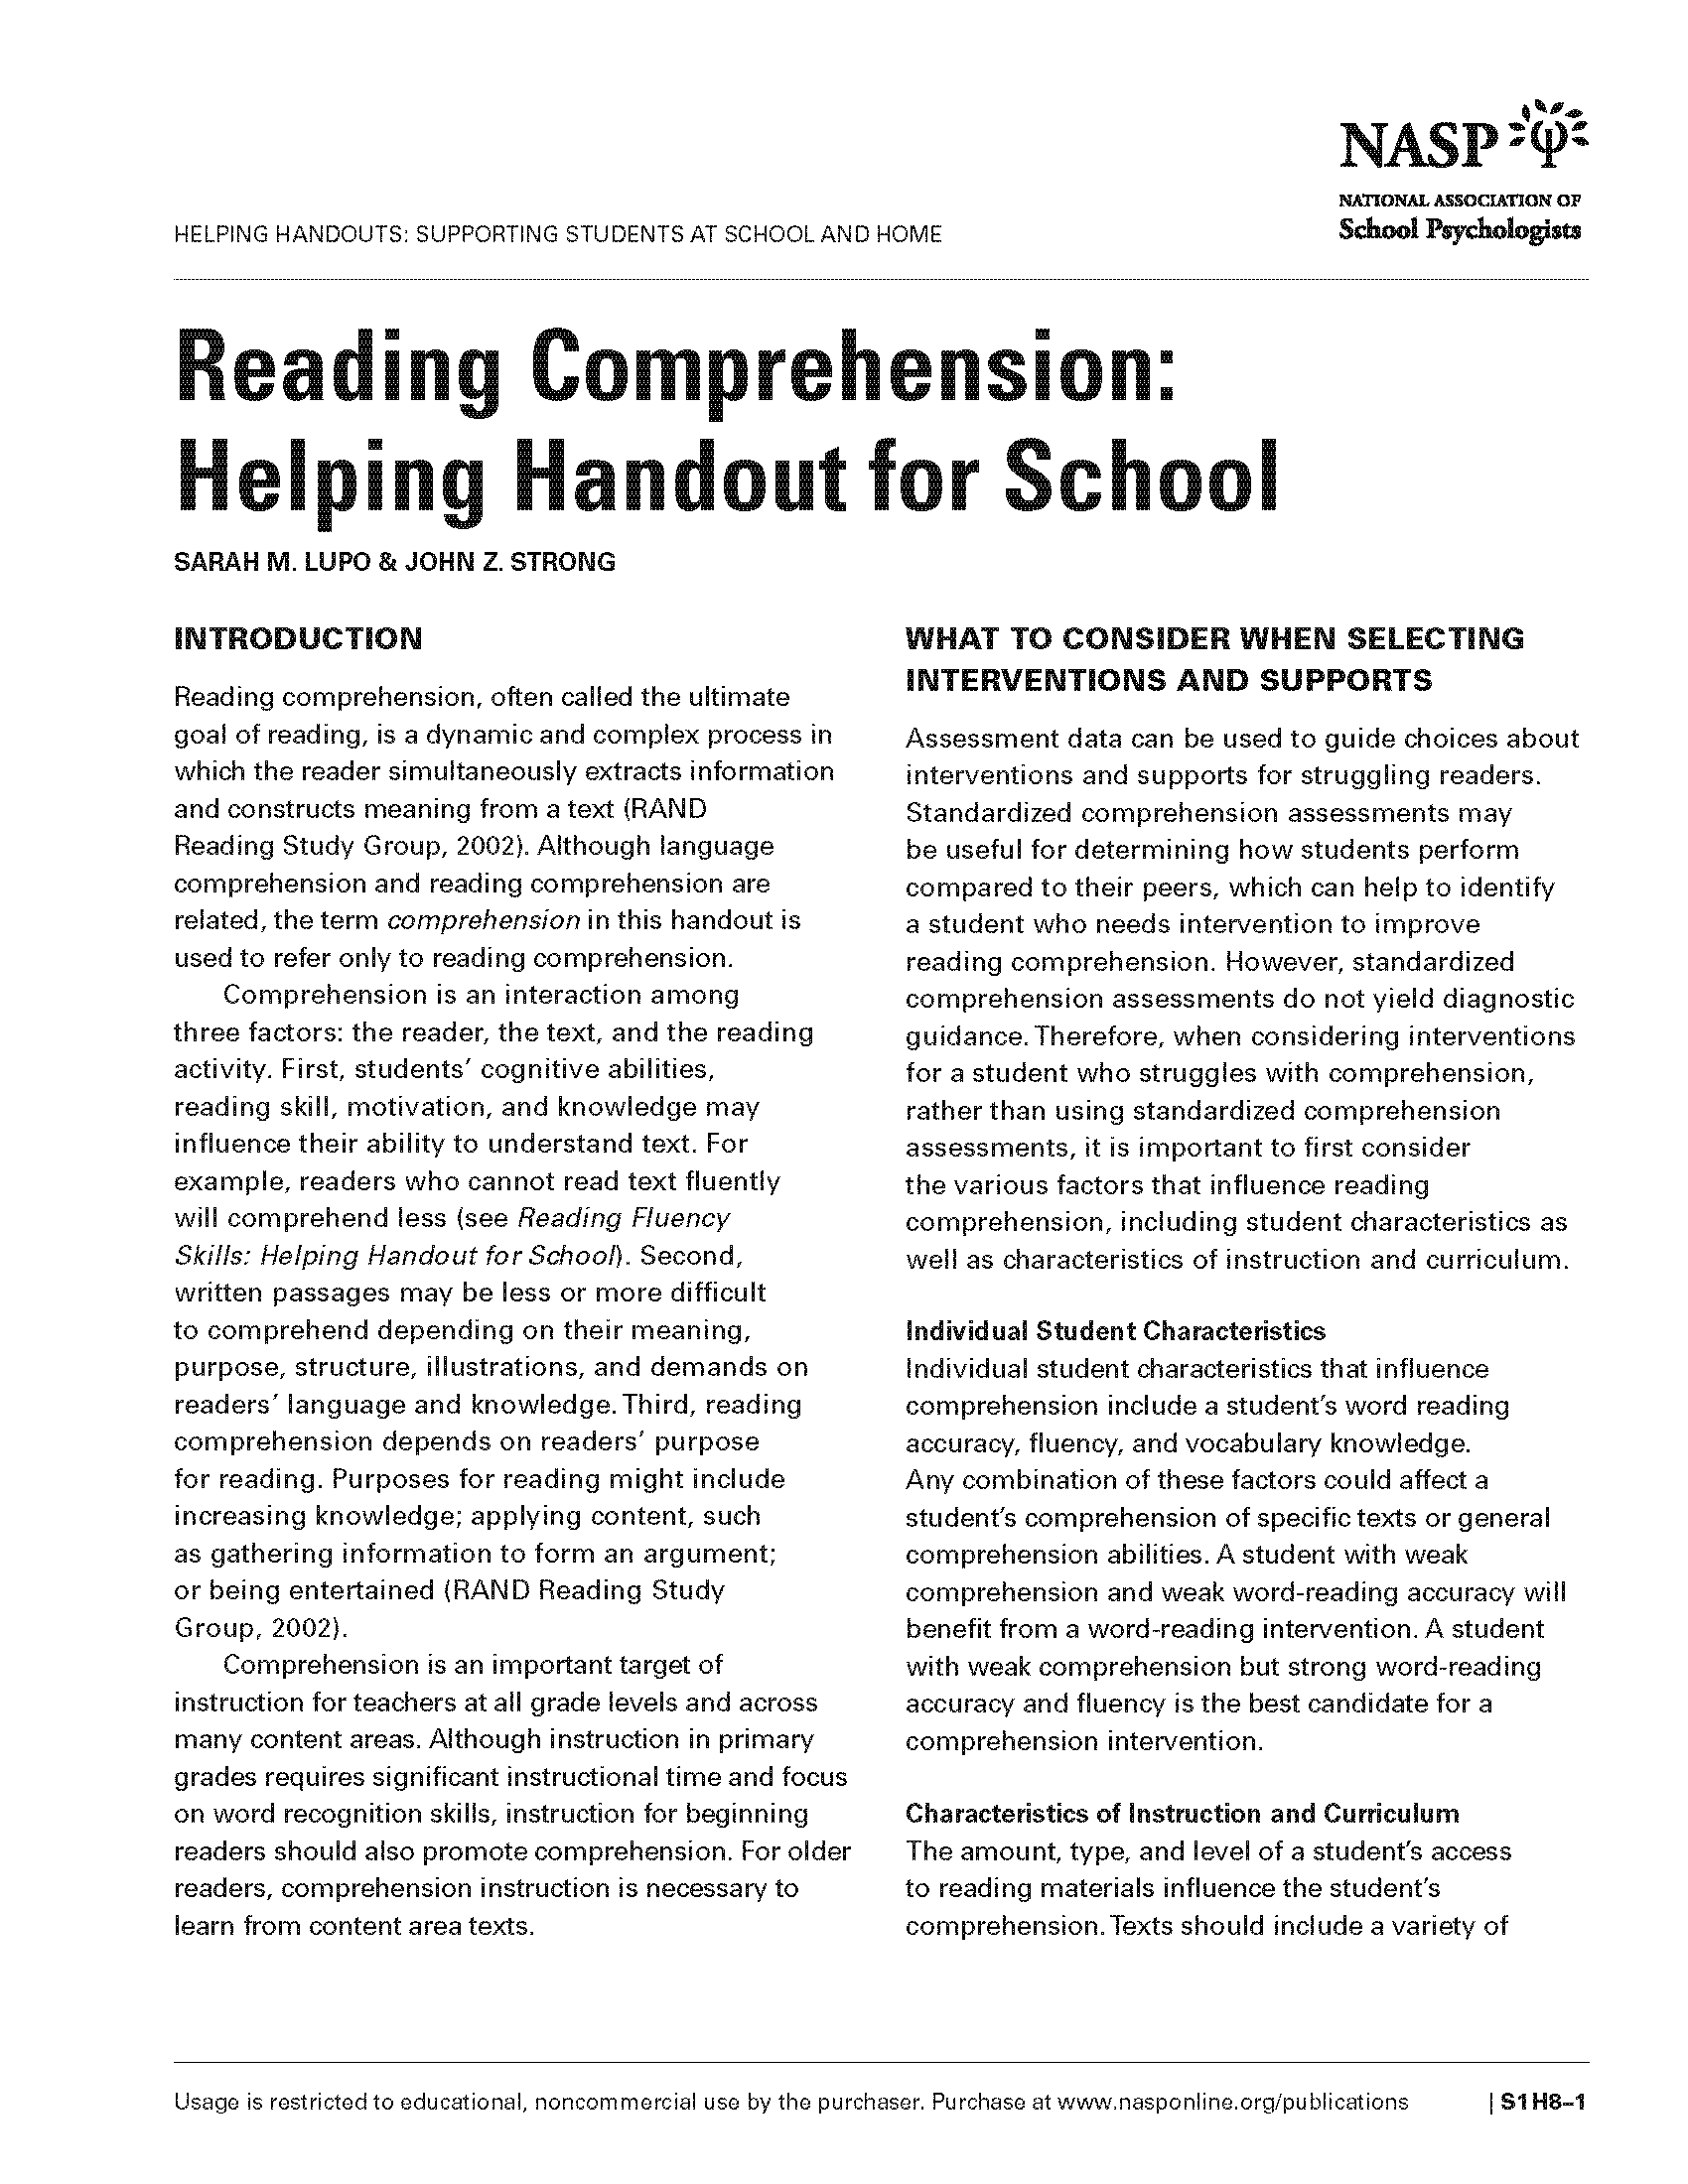 Reading Comprehension: Helping Handout for School